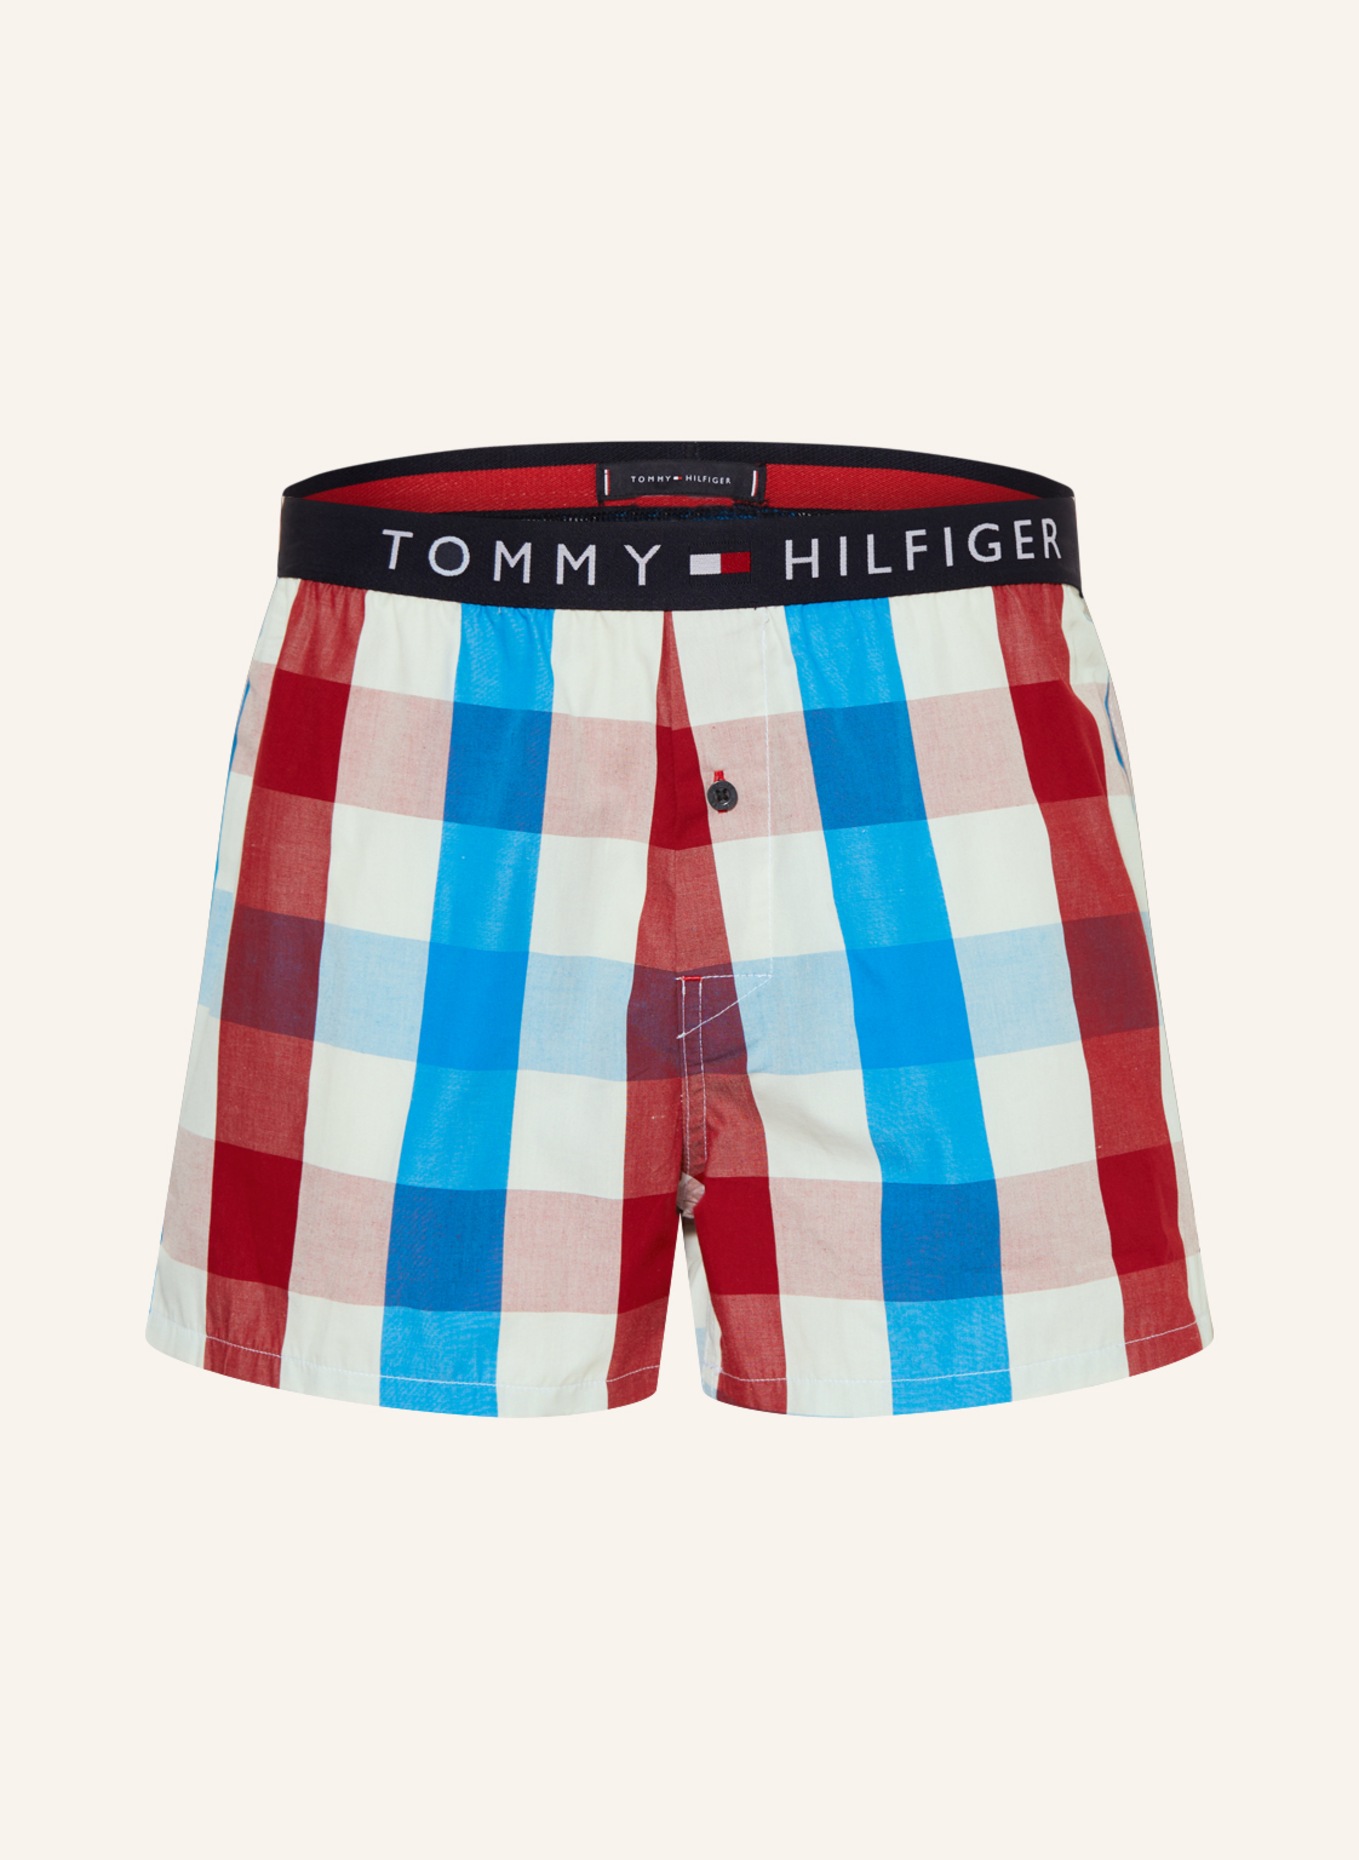 TOMMY HILFIGER Woven boxer shorts, Color: DARK RED/ BLUE/ WHITE (Image 1)